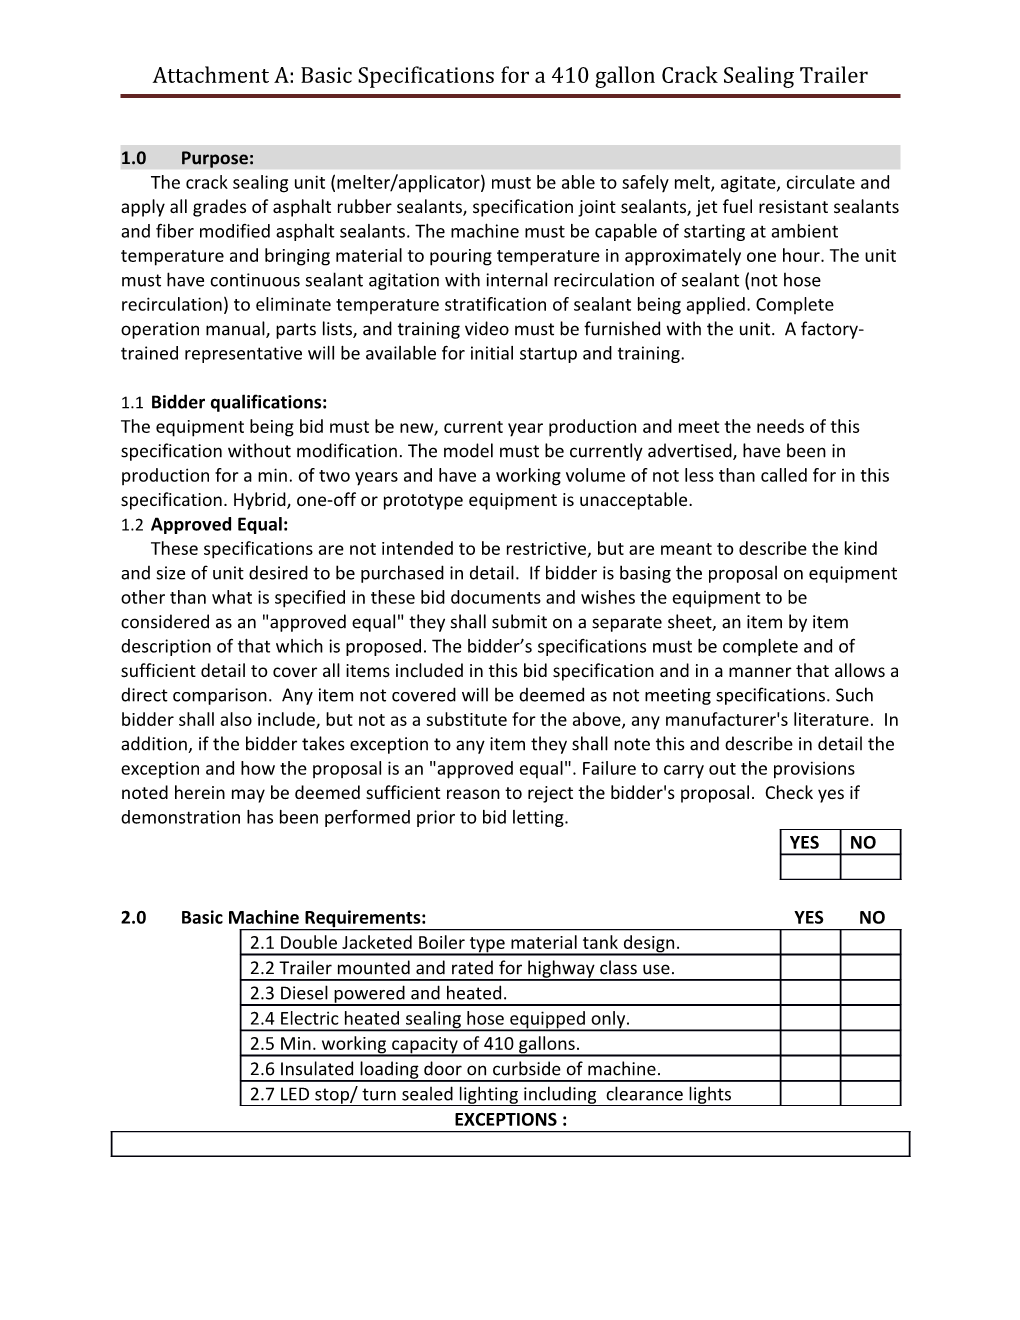 Attachment A: Basic Specifications for a 410 Gallon Crack Sealing Trailer